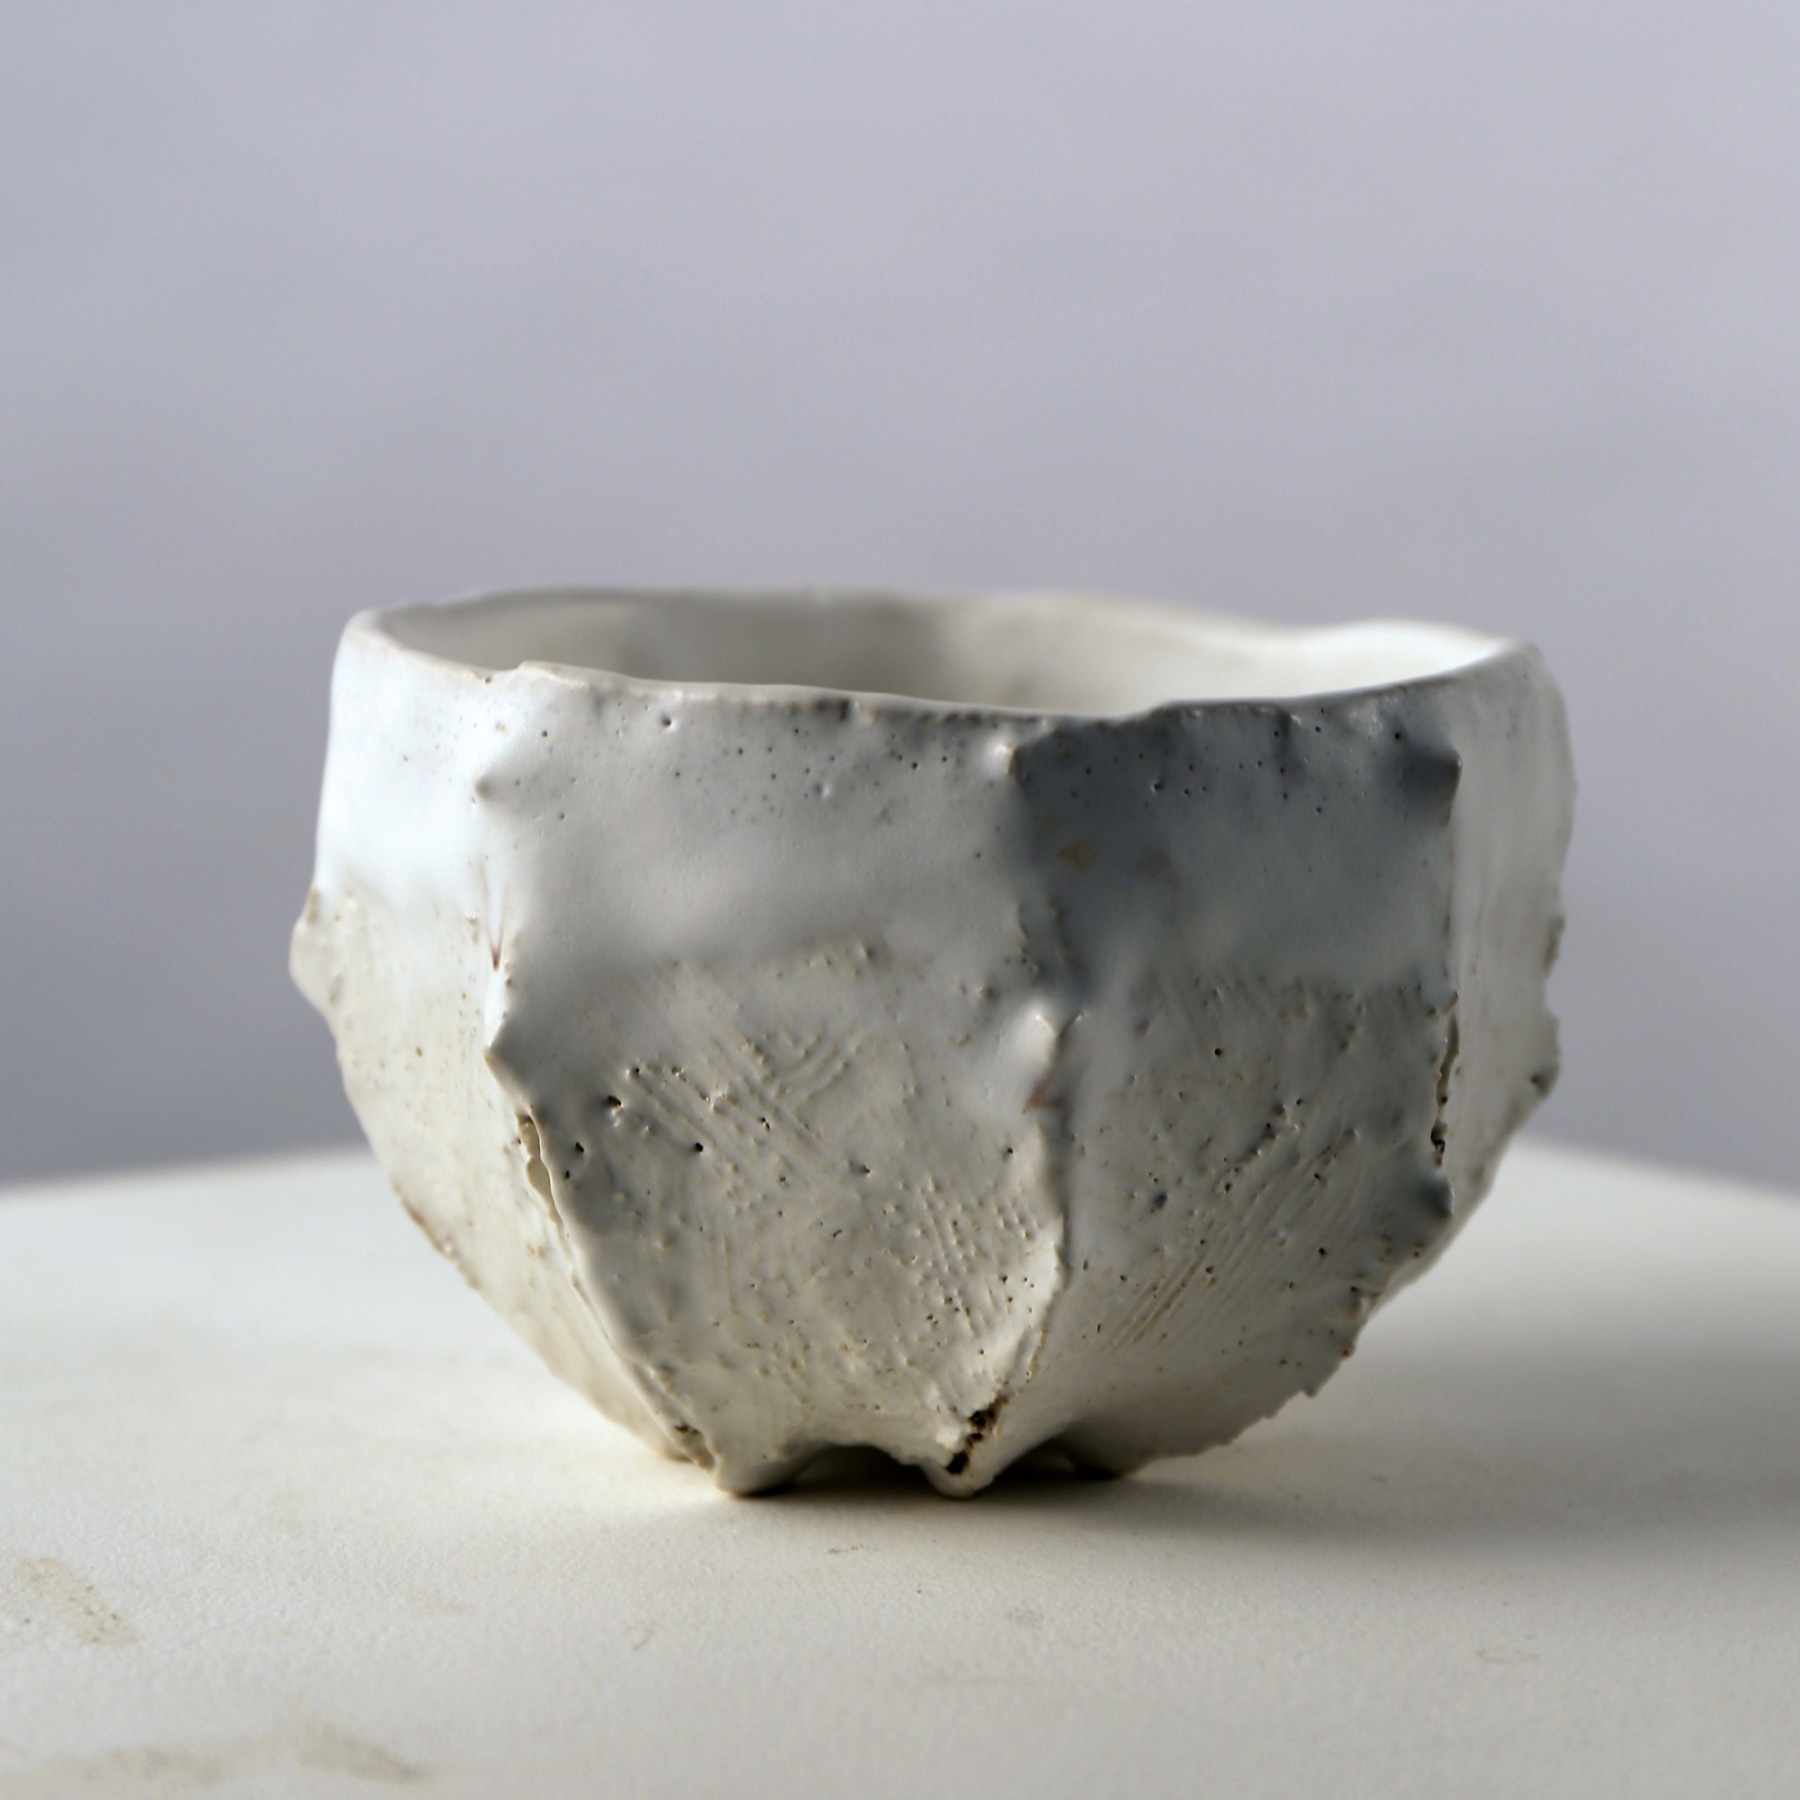 Matte white-glazed ribbed teabowl with small protrusions and interior pool of crackled glaze, 2007